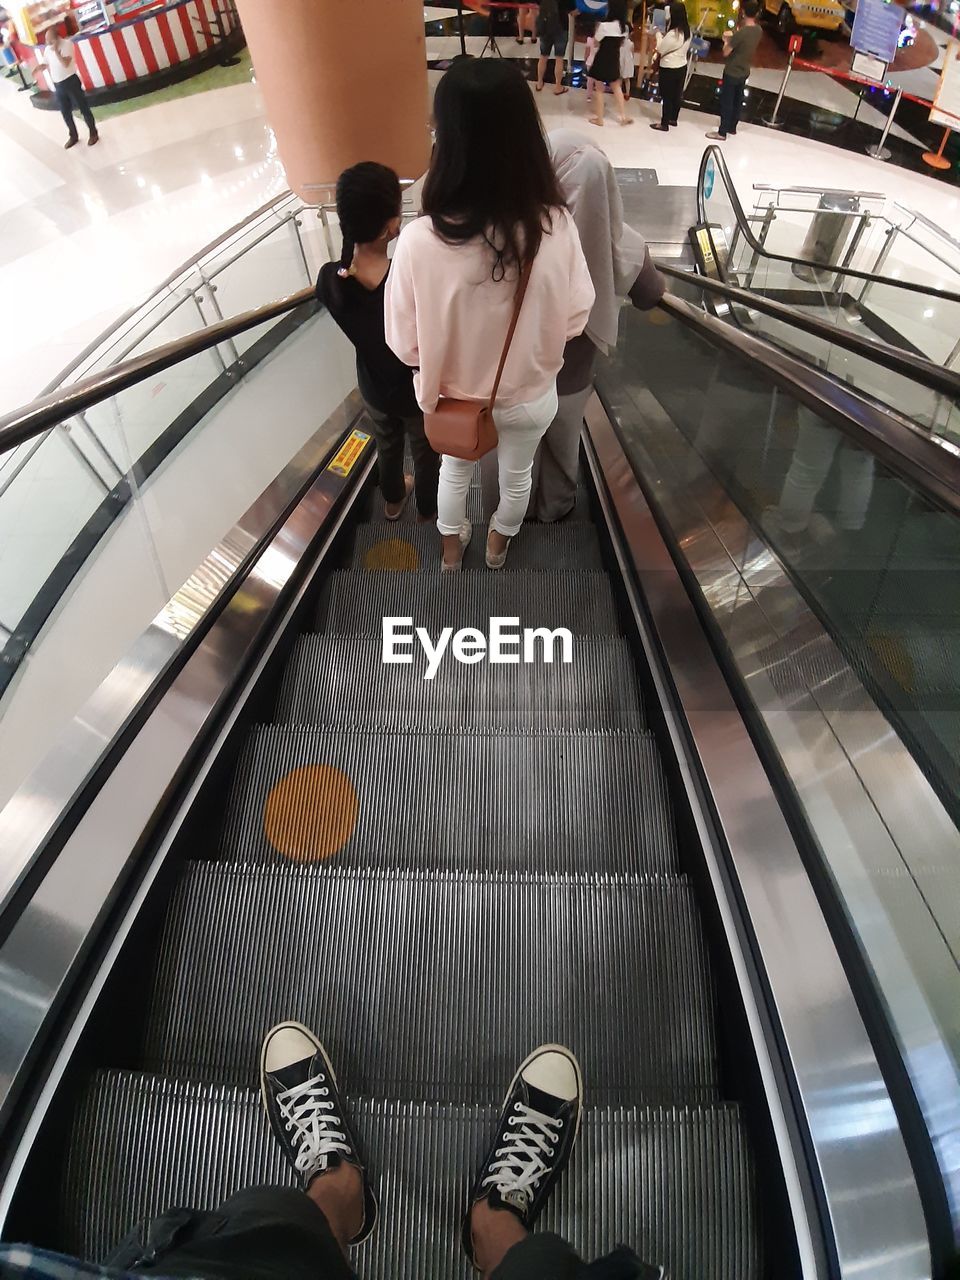 escalator, indoors, adult, architecture, men, one person, business, business finance and industry, lifestyles, women, footwear, clothing, technology, public transport, store, interior design, high angle view, person, standing, transport